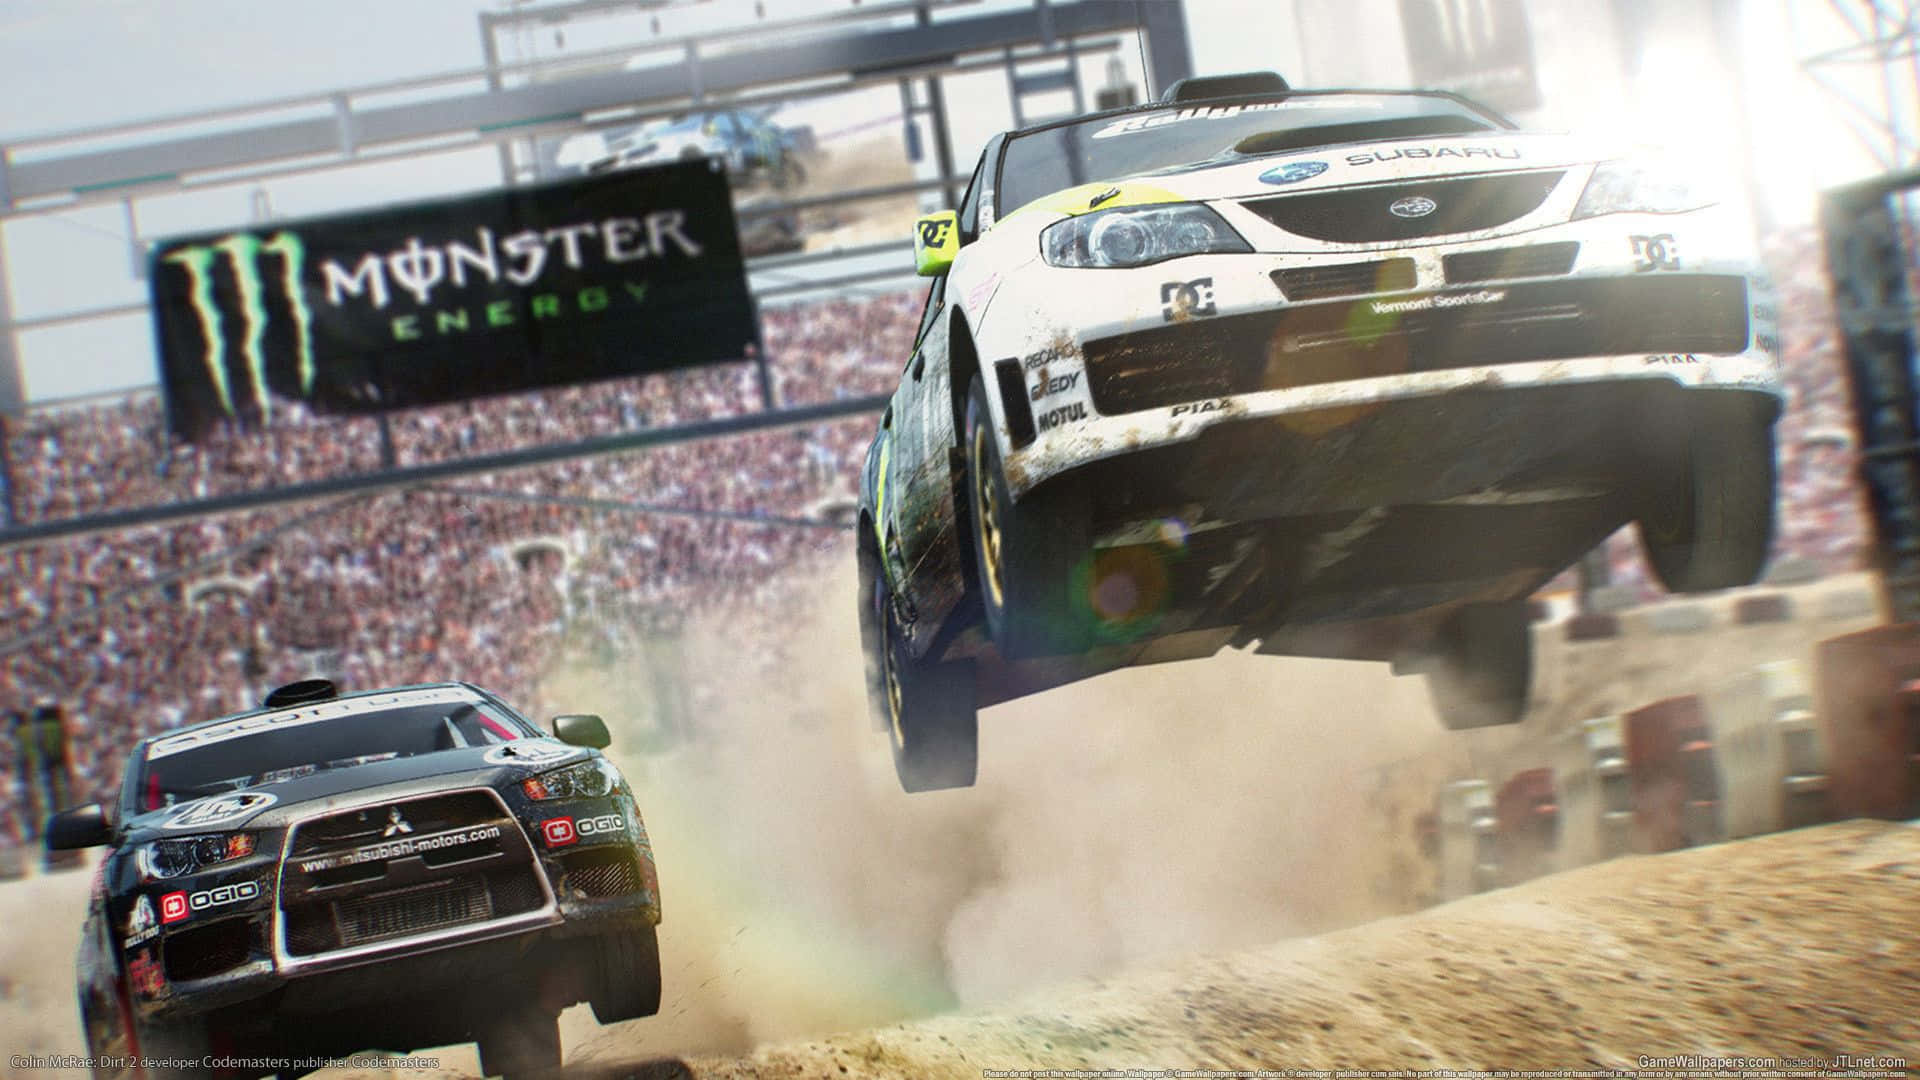 Prepare for excellent racing with the Dirt 3 Video Game